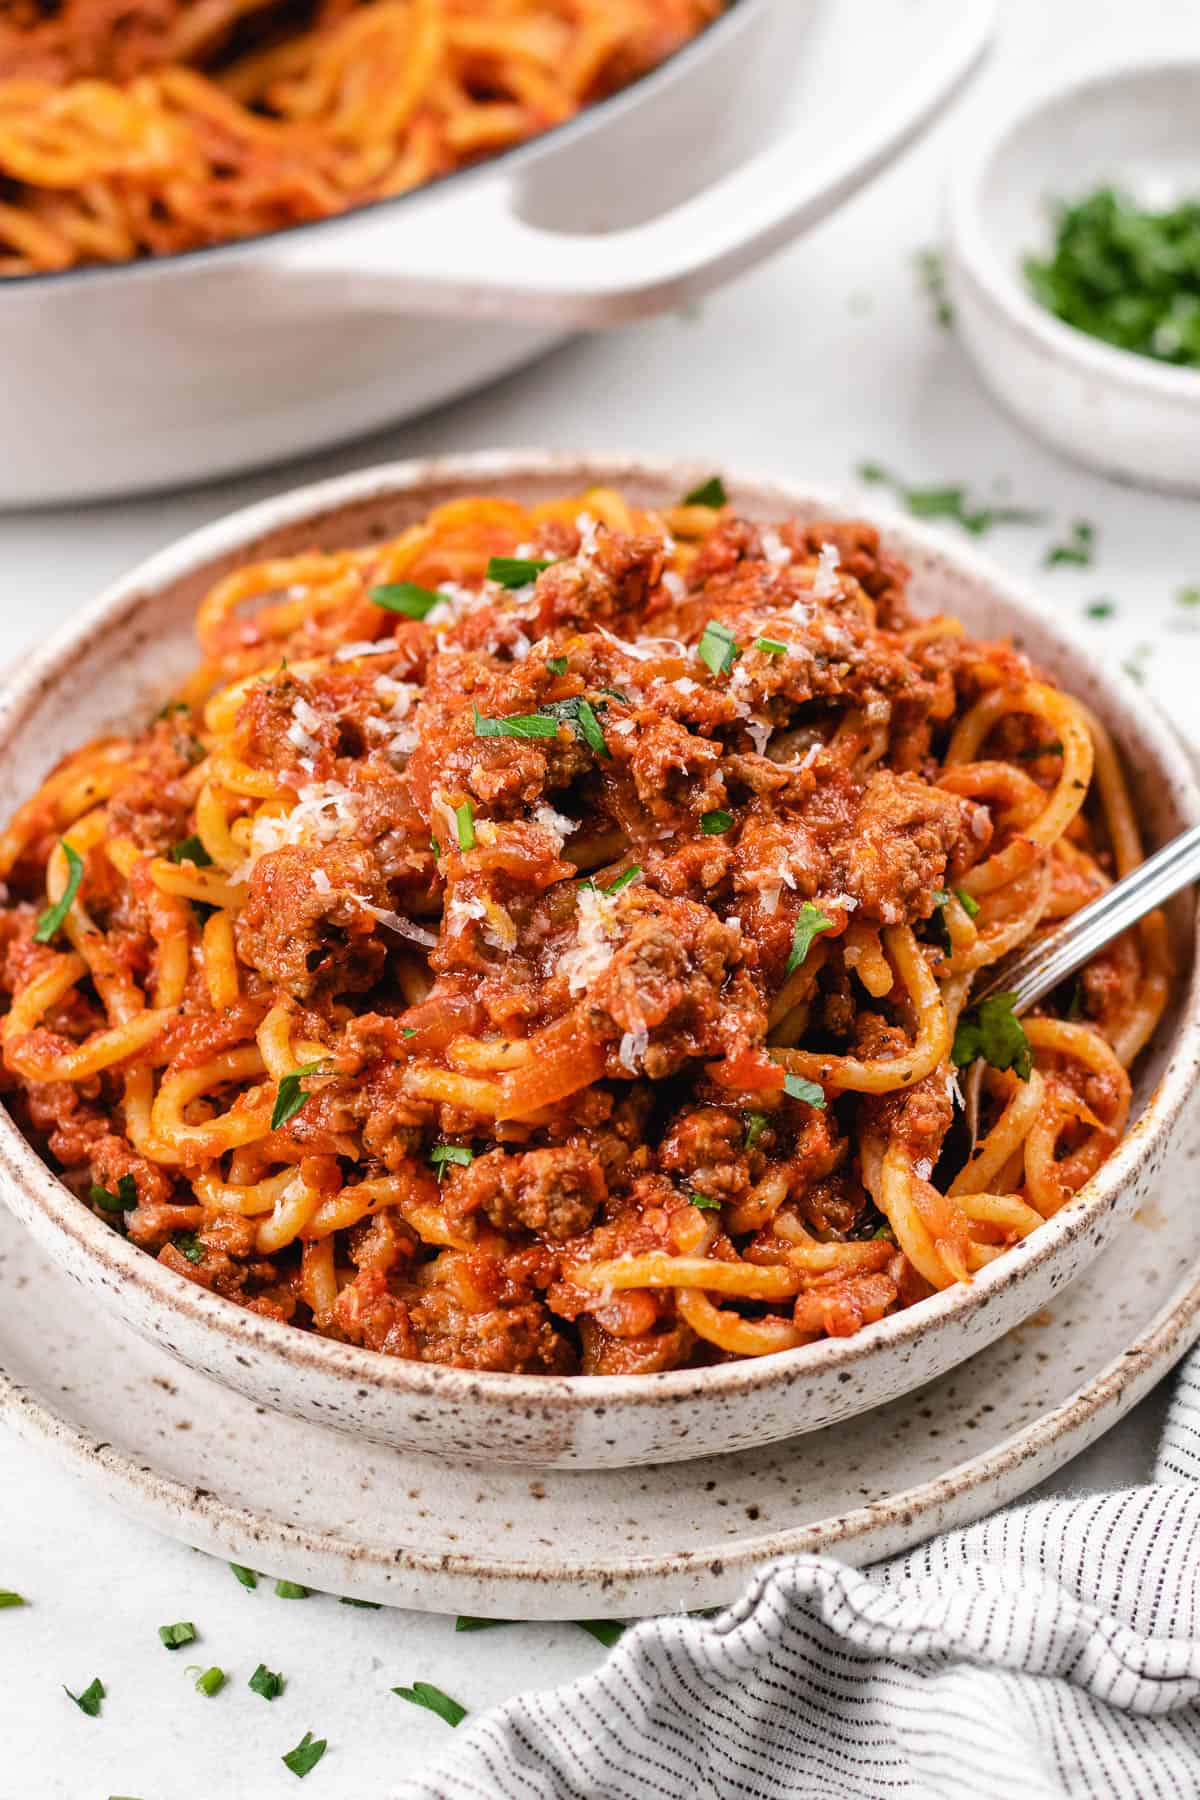 Spaghetti Bolognese in a bowl with a fork.